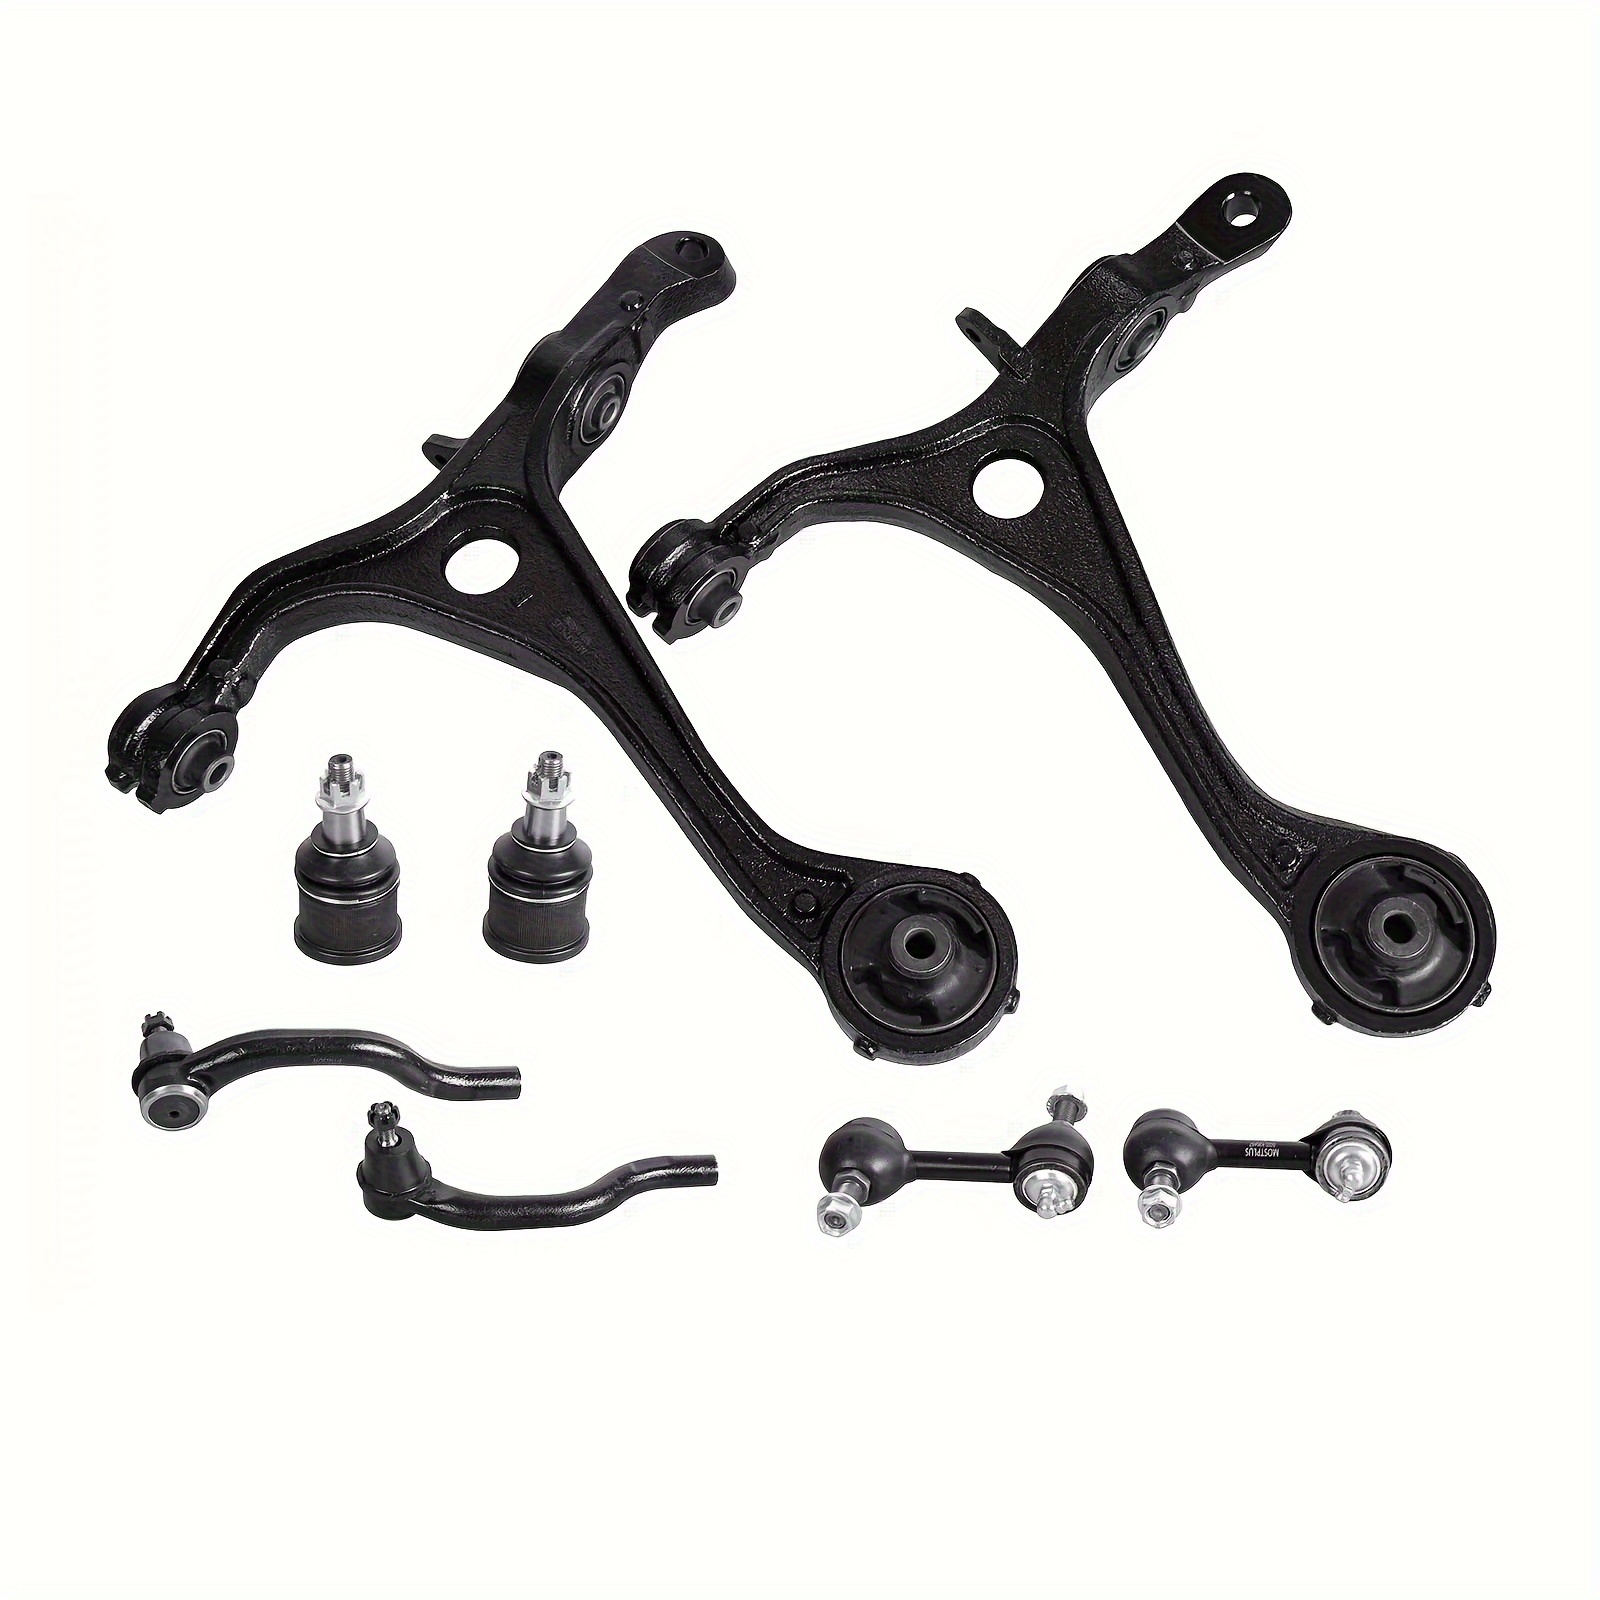 

Front Lower Control Arms & Ball Joints Kit For Tsx Honda Accord 2004-2007 Oe K640290x1 K640289x1